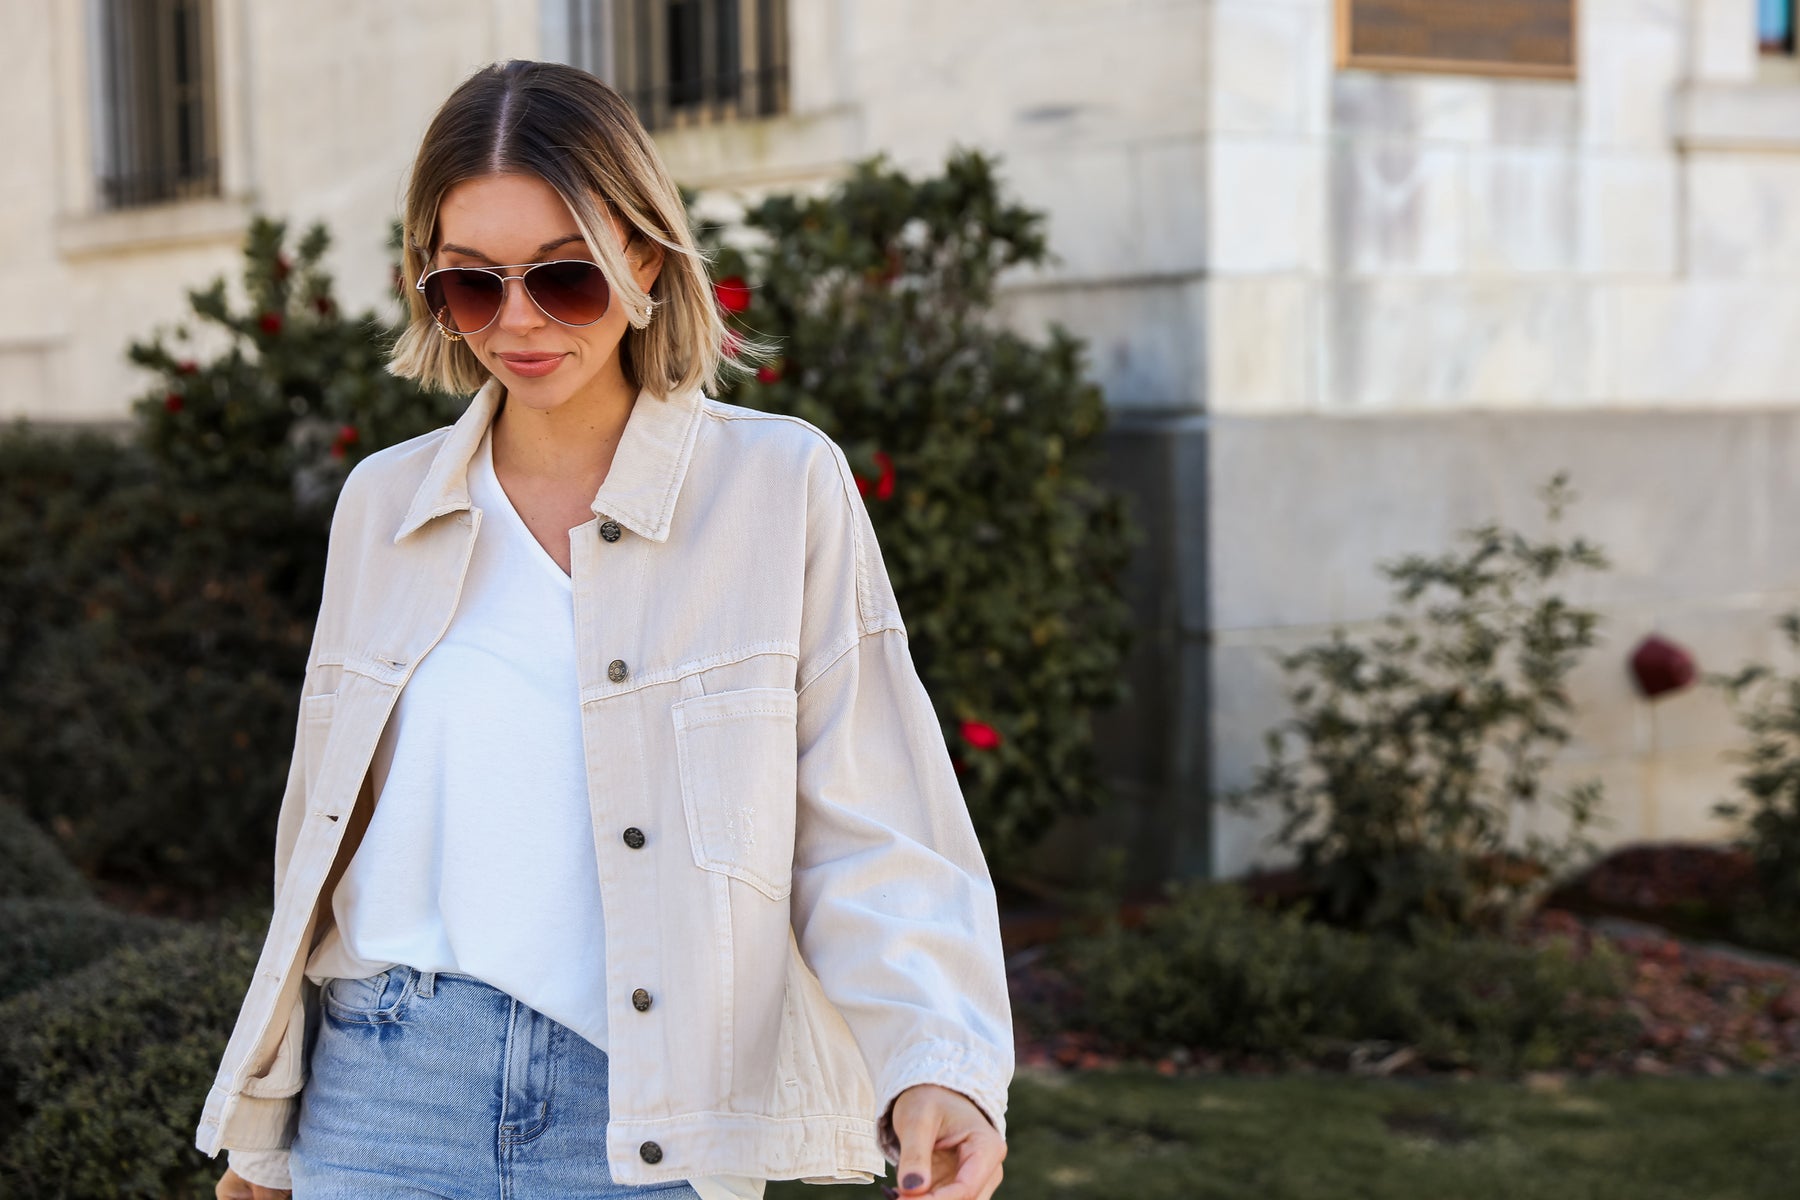 model wearing cute, taupe denim jacket for spring - cute spring jackets